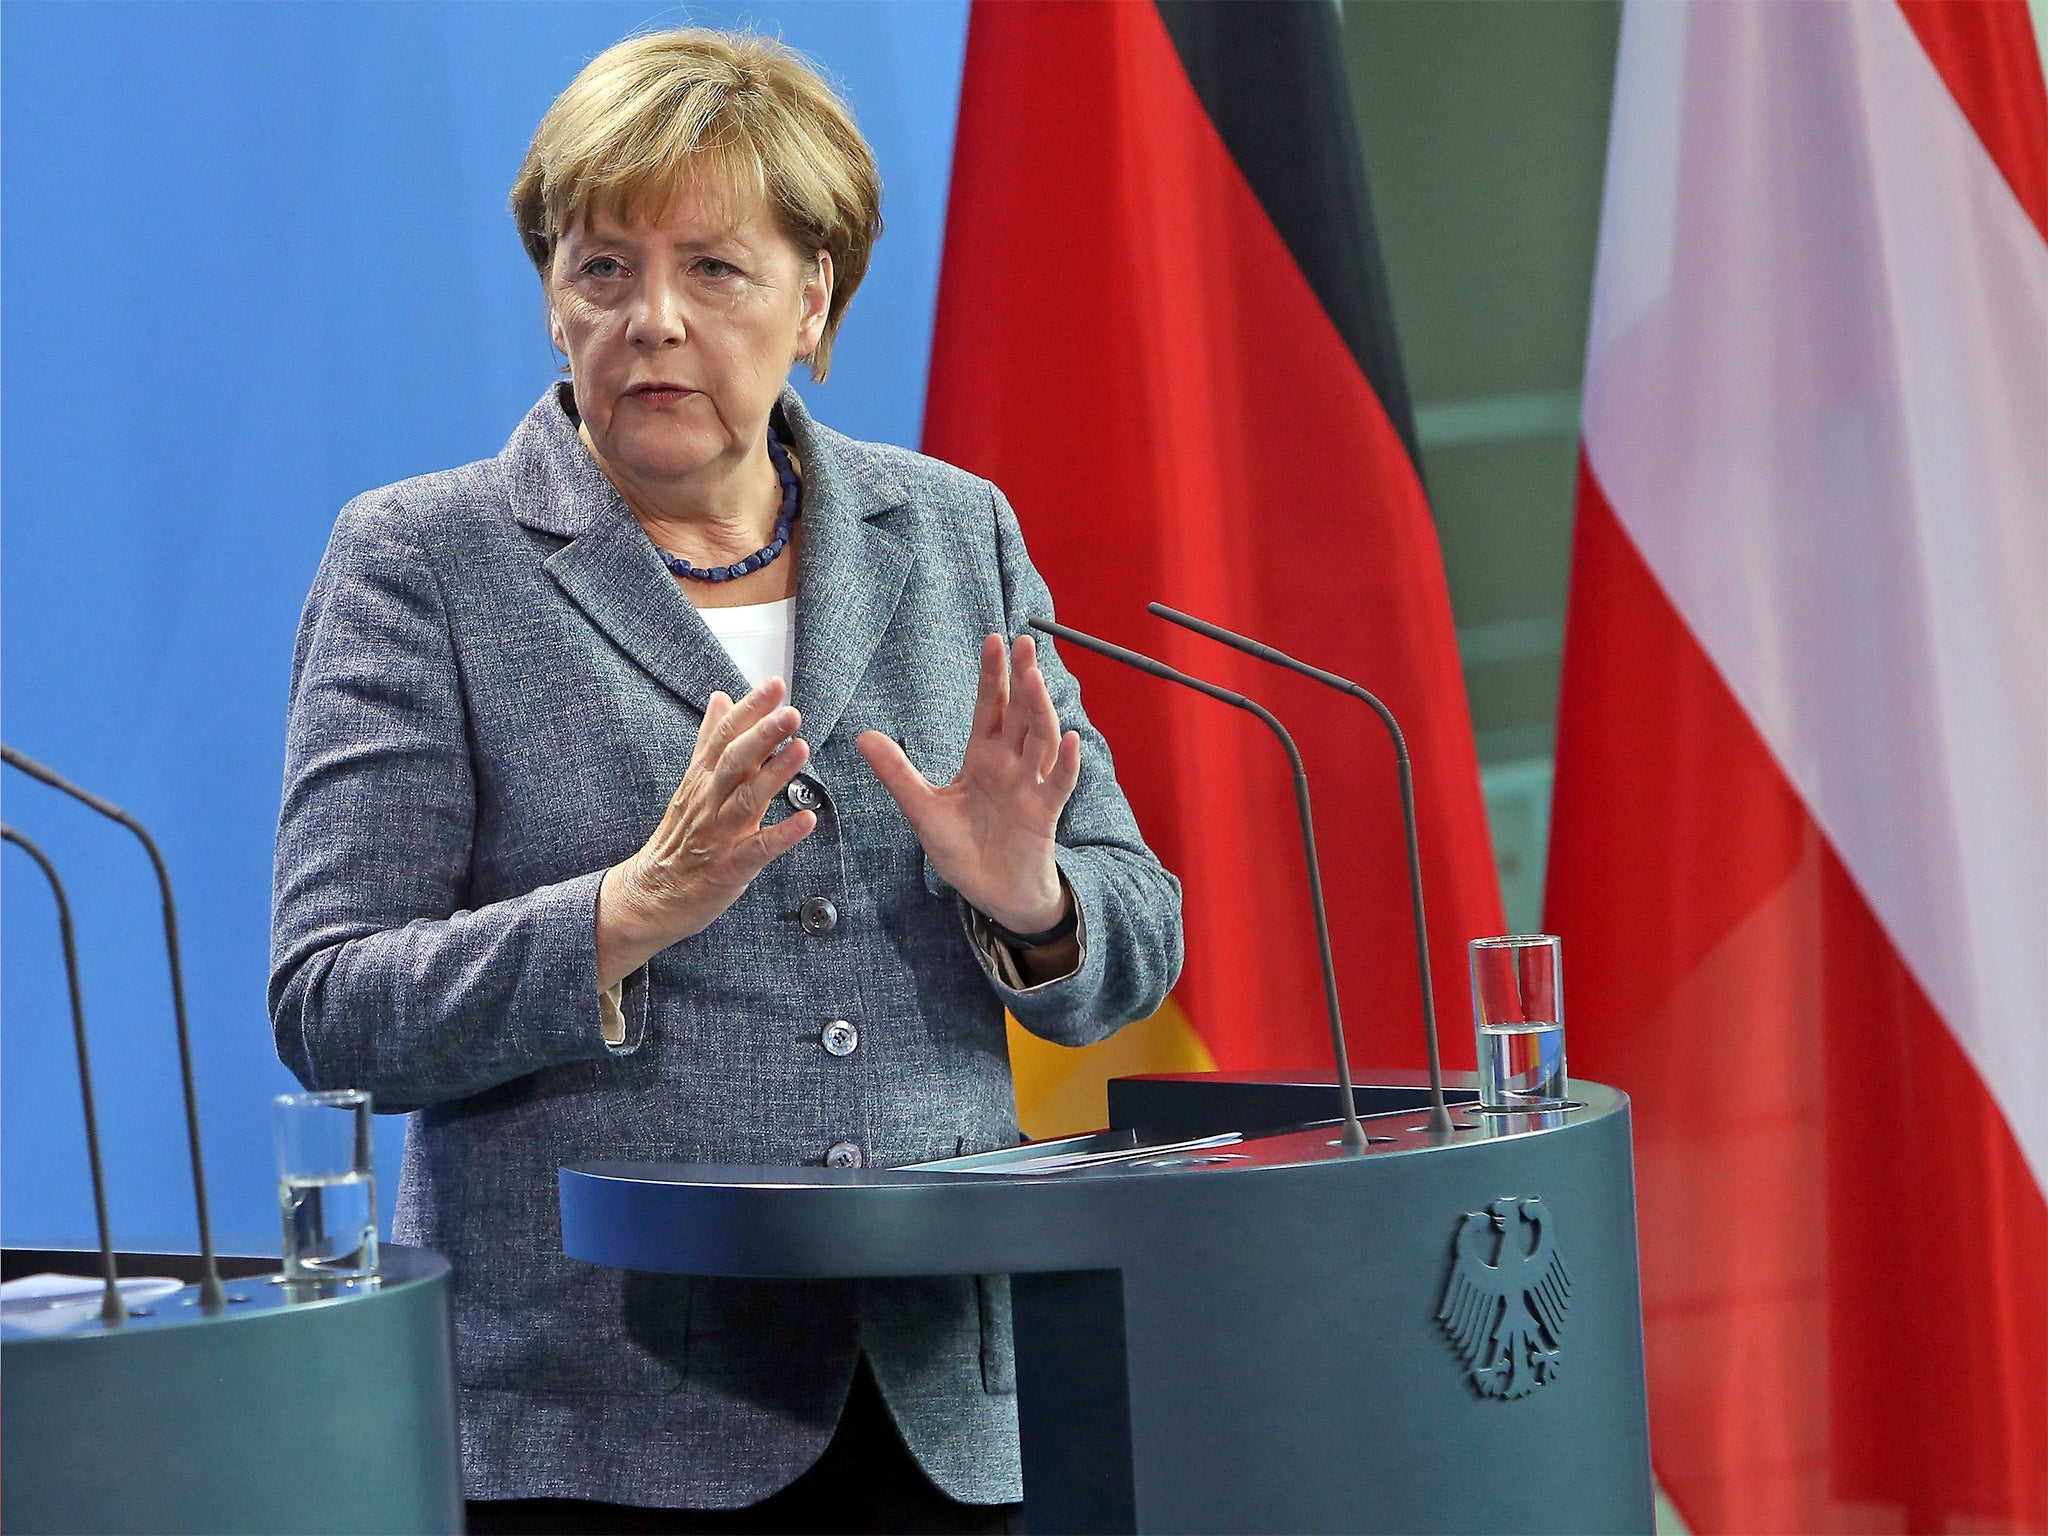 German Chancellor Angela Merkel speaks to the media after talks on the ongoing refugee crisis, in Berlin (Getty)